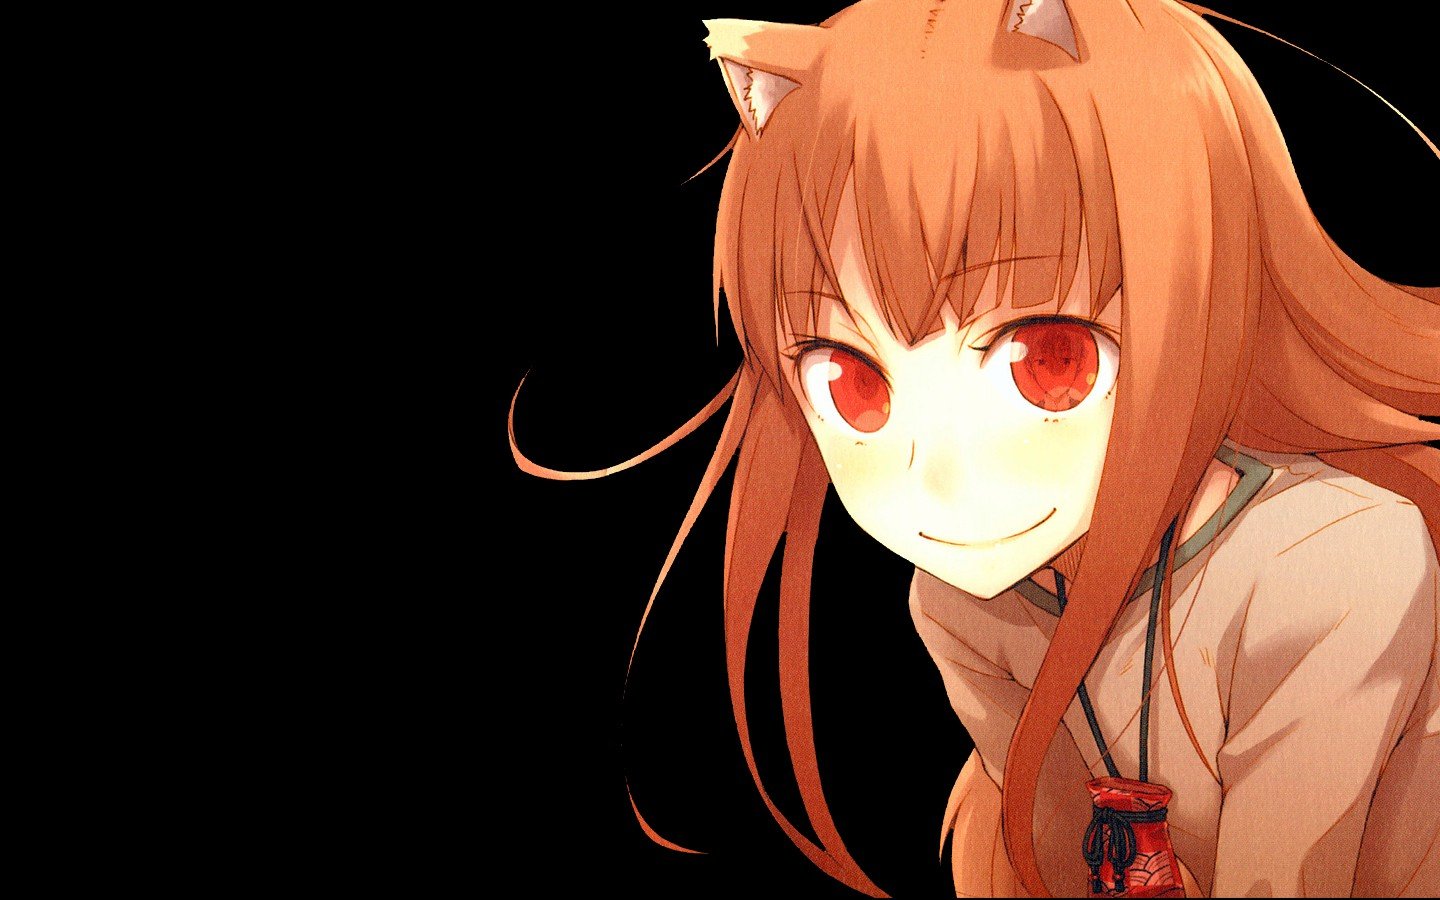 Holo, Spice and Wolf, Anime girls Wallpaper